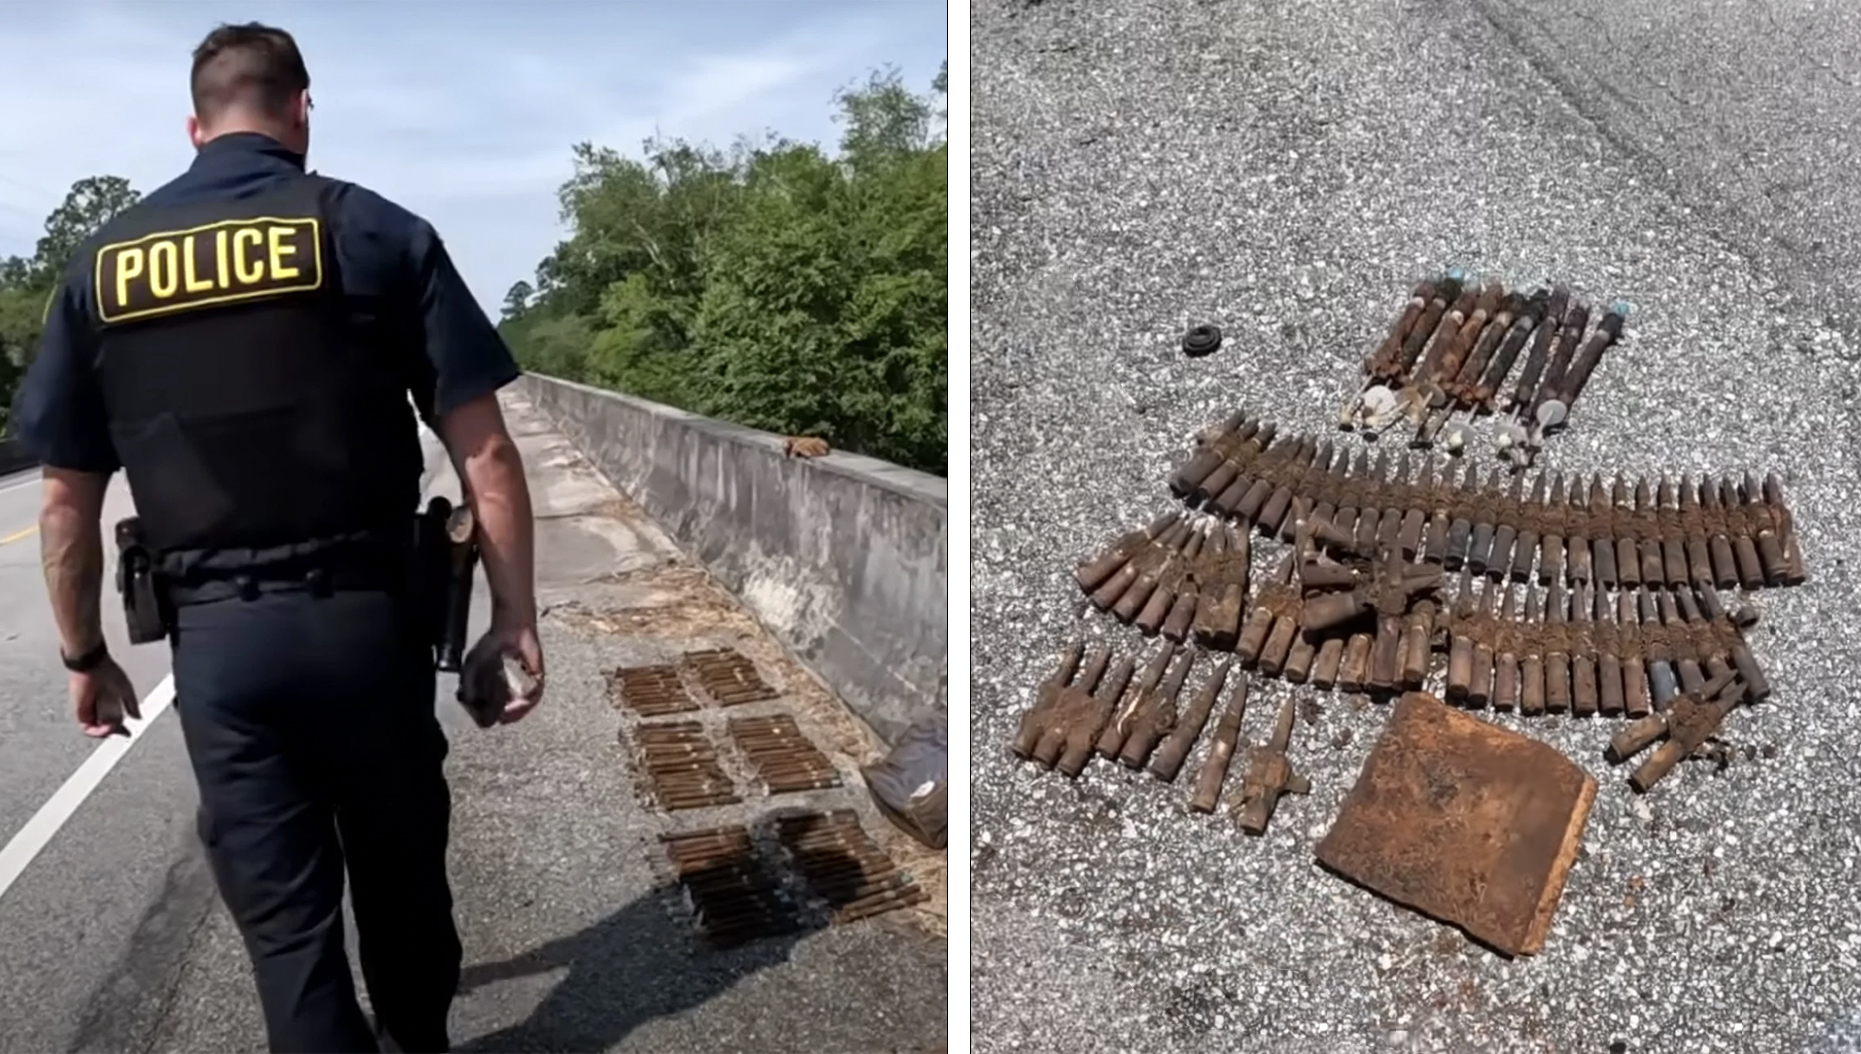 Magnet Fishermen Ticketed After Uncovering 86 Rockets, Other Ordnance While Fishing on a Georgia Army Base